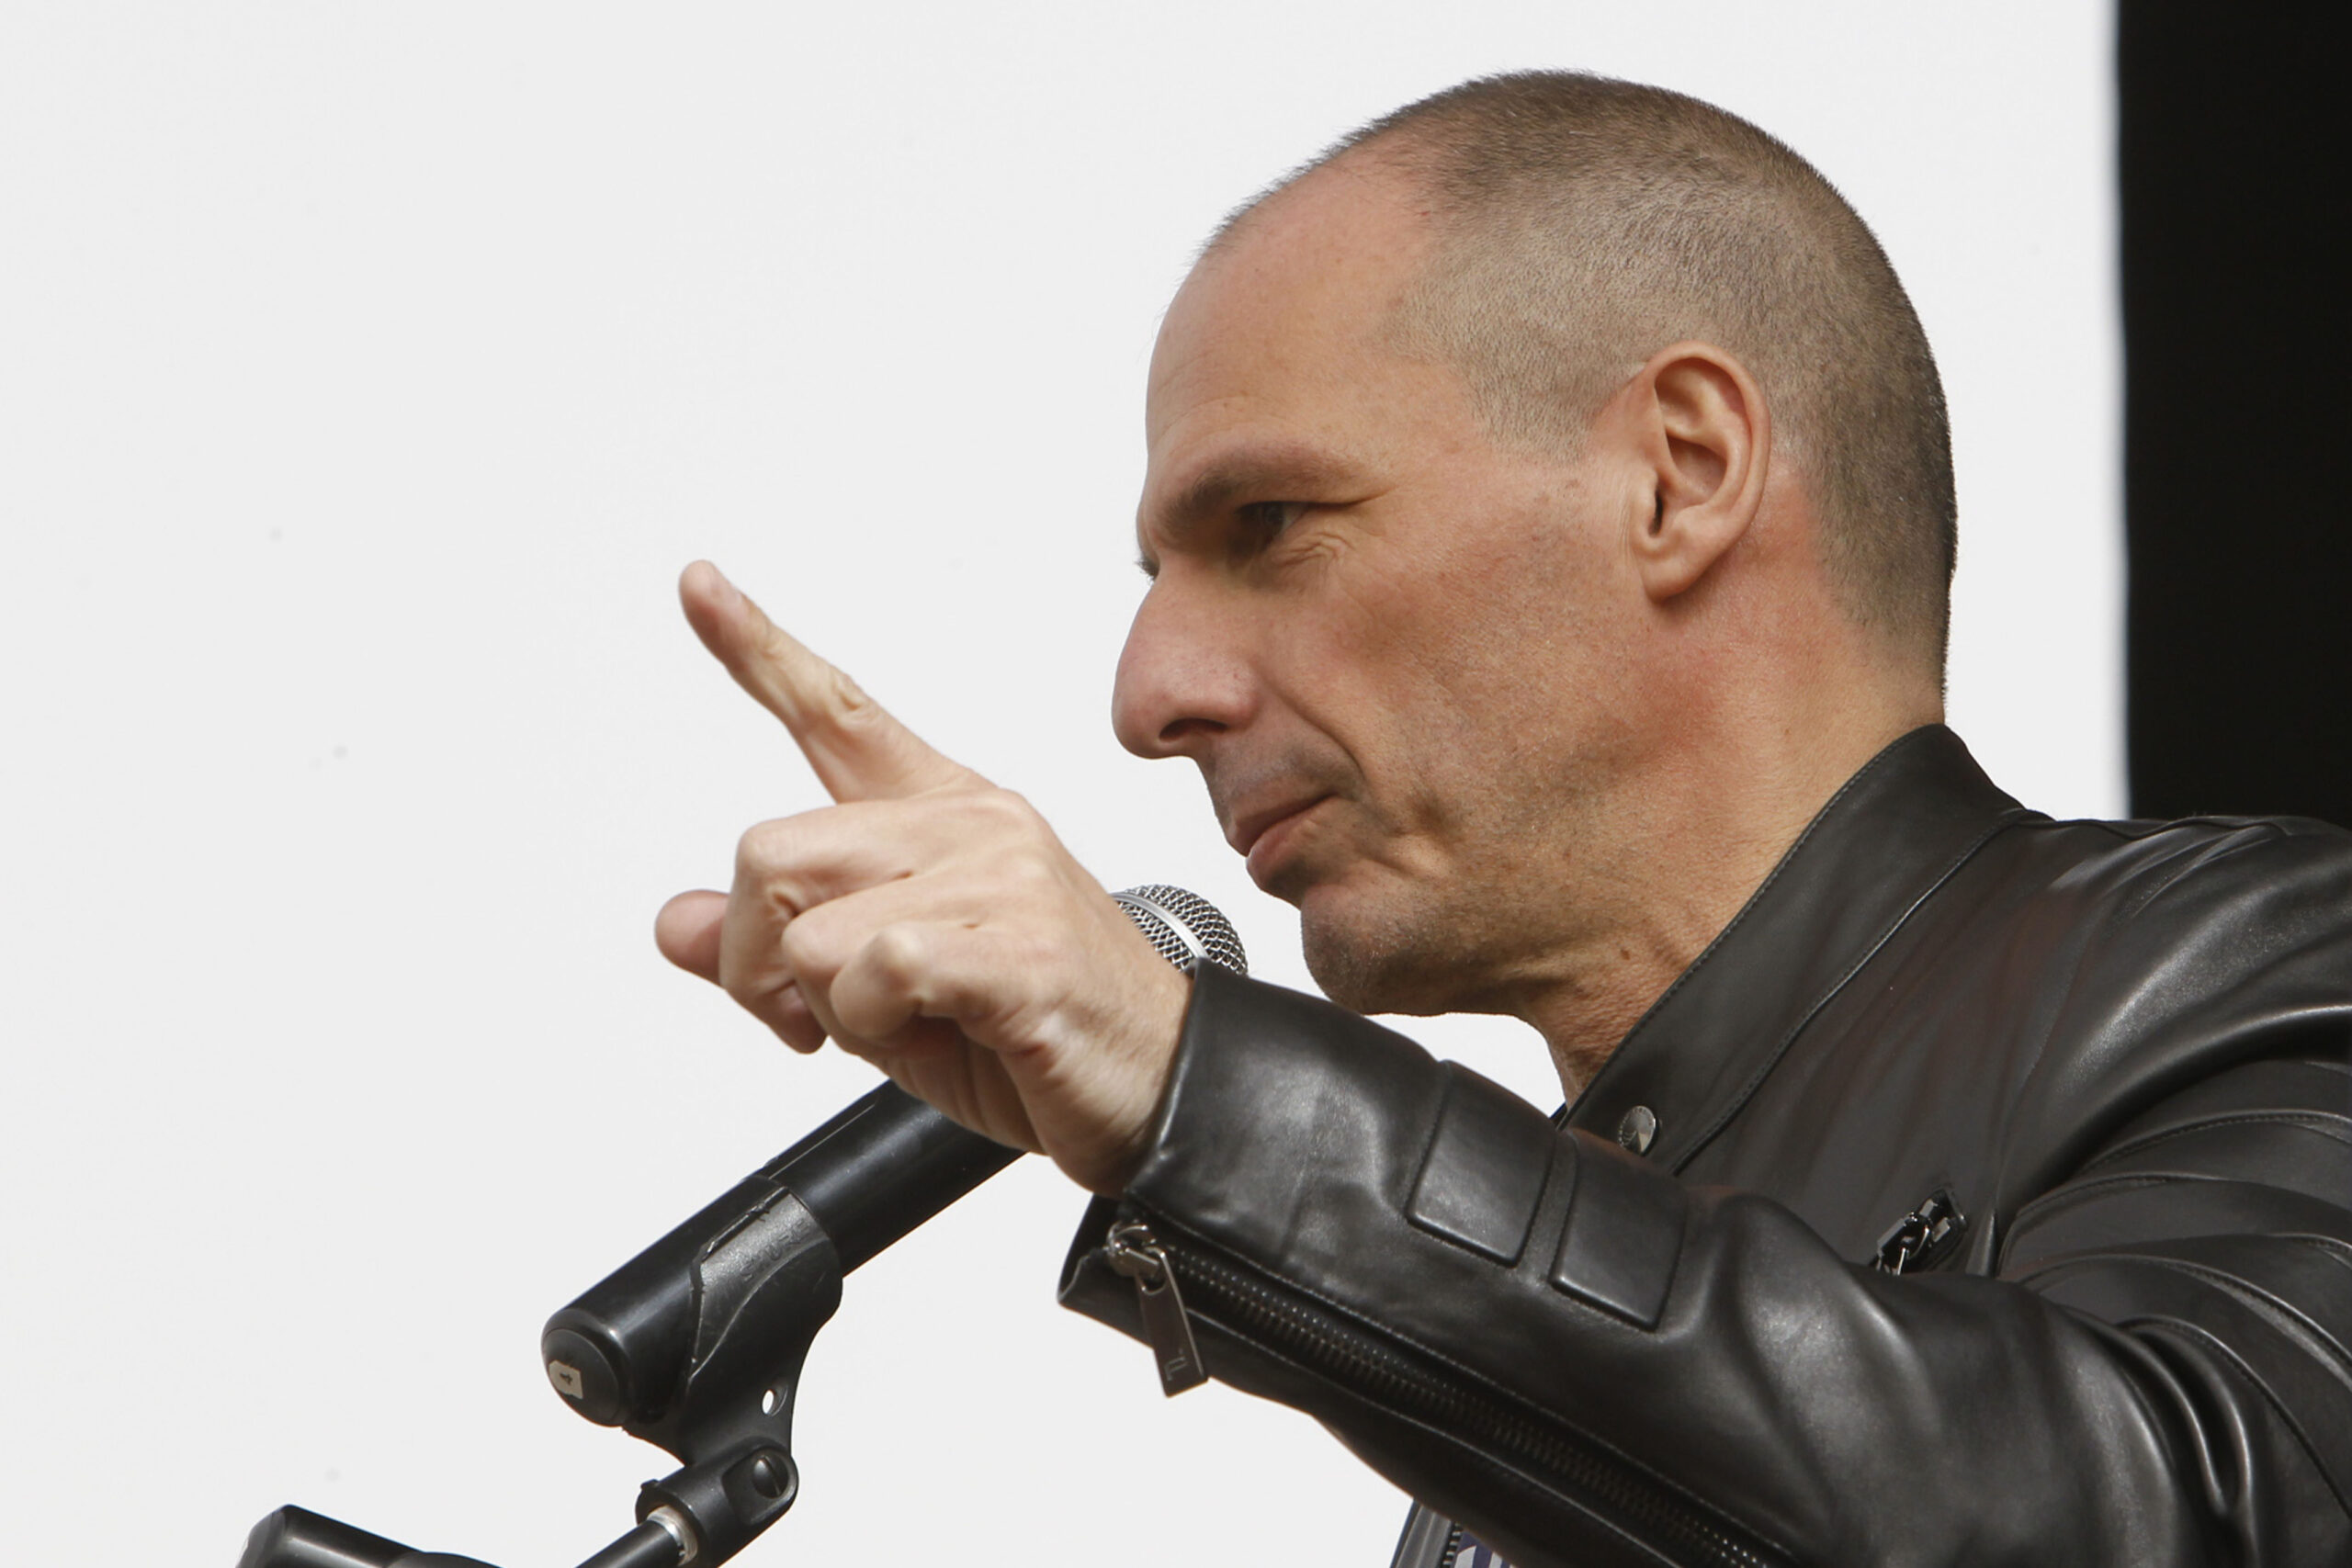 Former Greek Finance Minister Yanis Varoufakis speaks against austerity at forum "The European Union as a battlefield", in Madrid, on Sunday 21st February, 2016. (GTRES via AP Images)